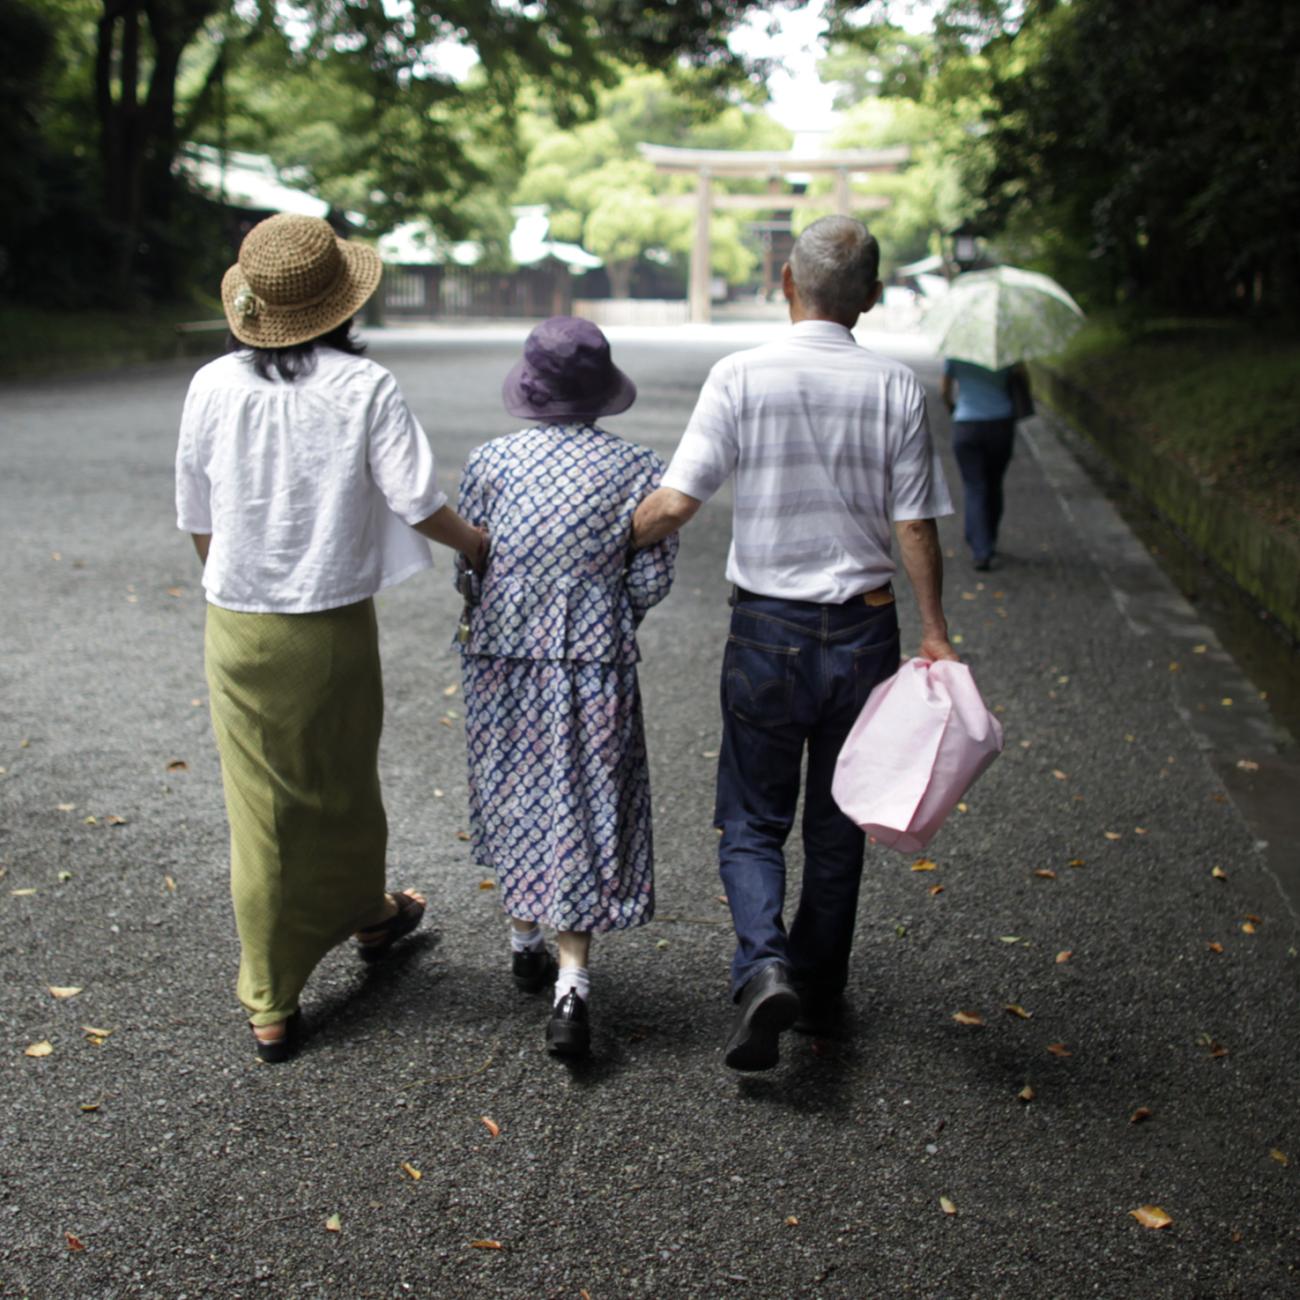 Three people walk down a street with their arms linked.